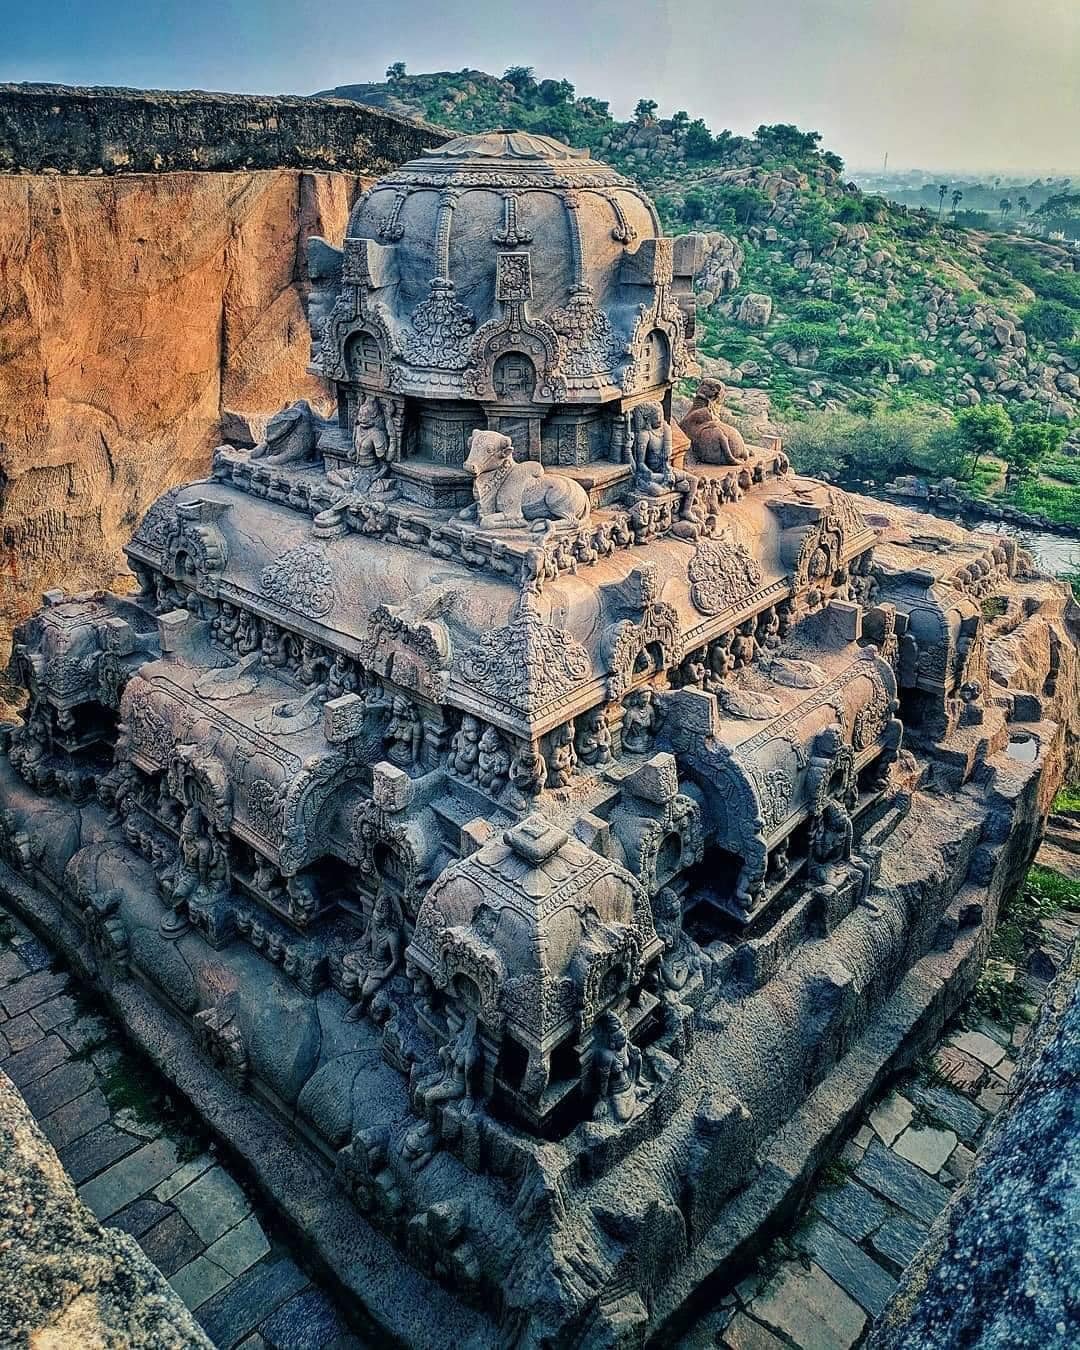 Kailasa Temple In Ellora, Maharashtra, India, Is The World's Largest Monolithic Piece Of Art